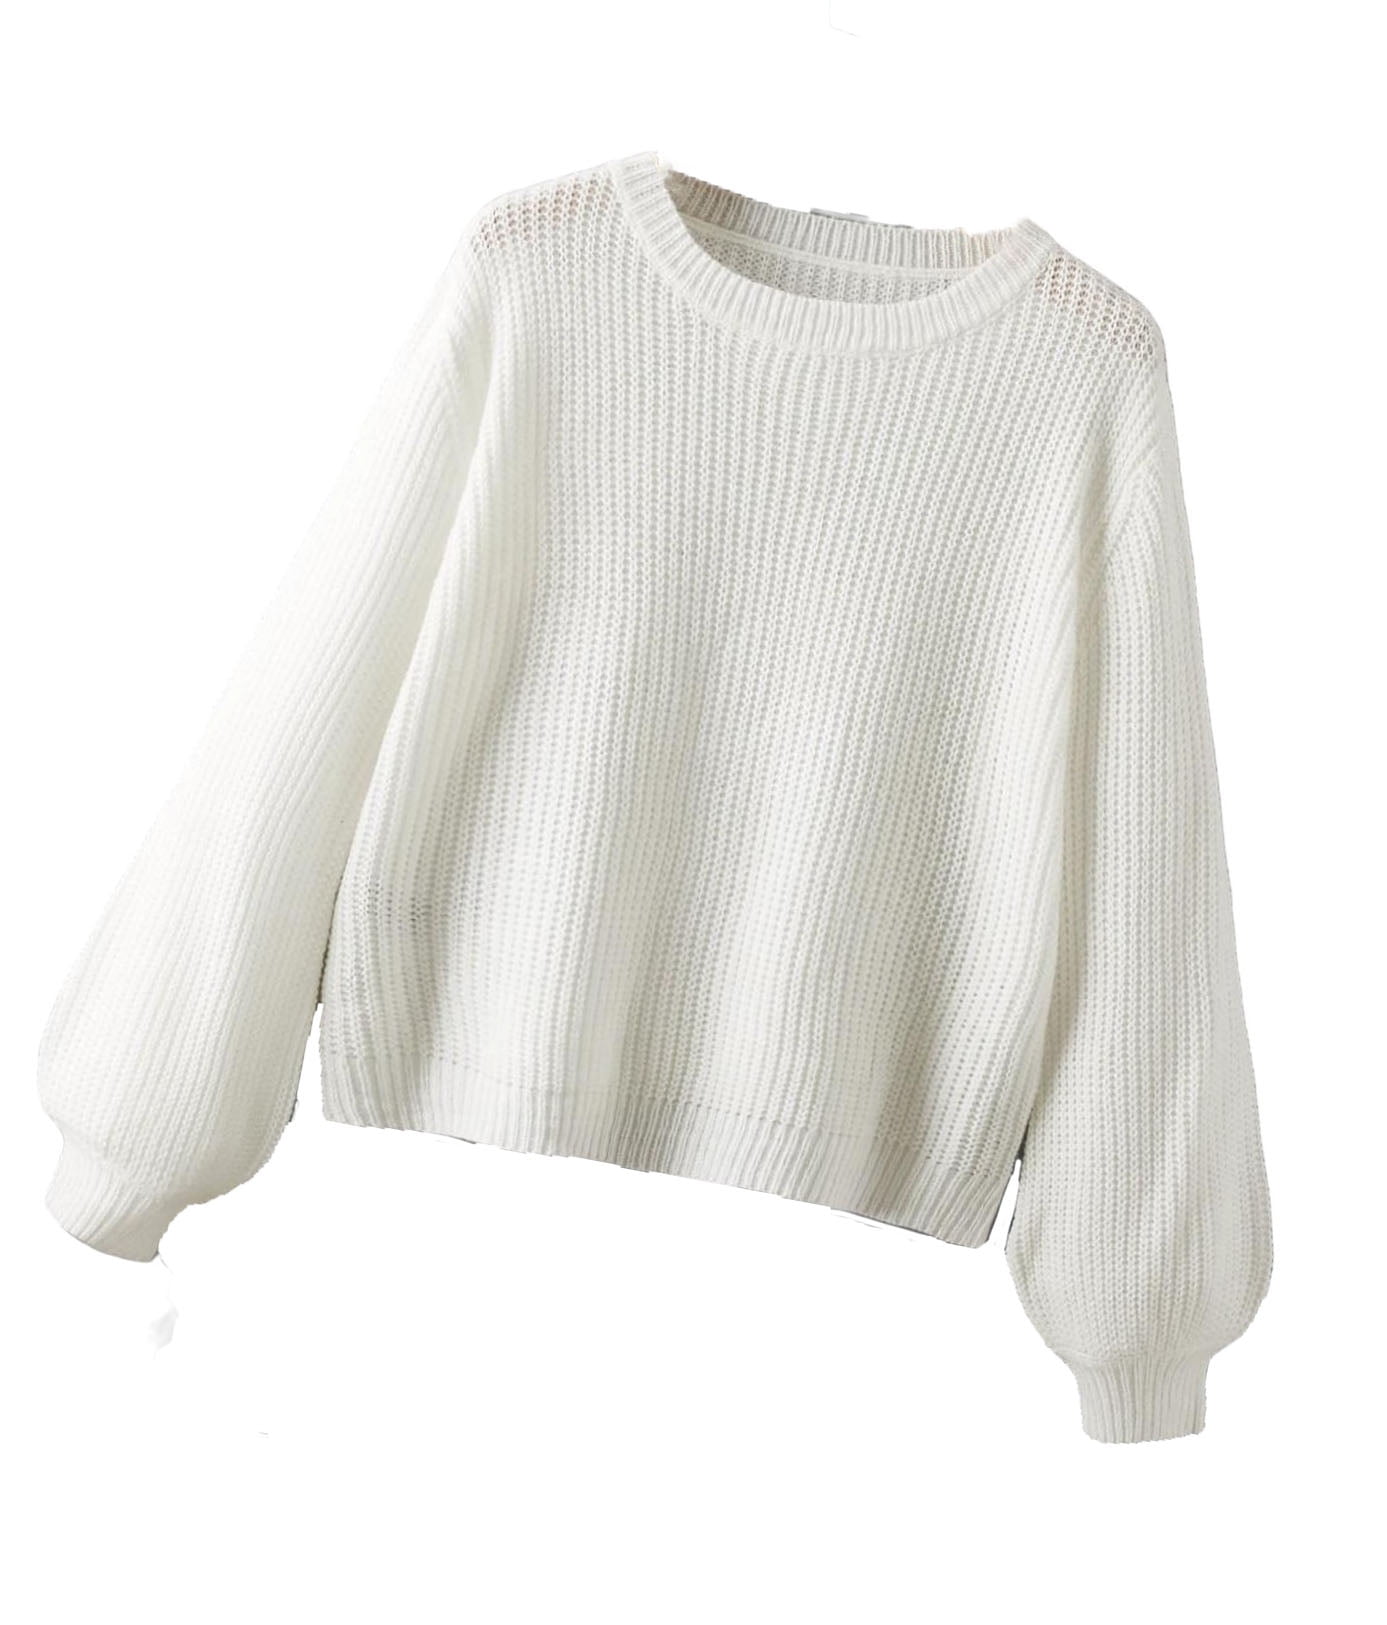 Womens Sweaters Casual Plain Round Neck Pullovers White S - Walmart.com